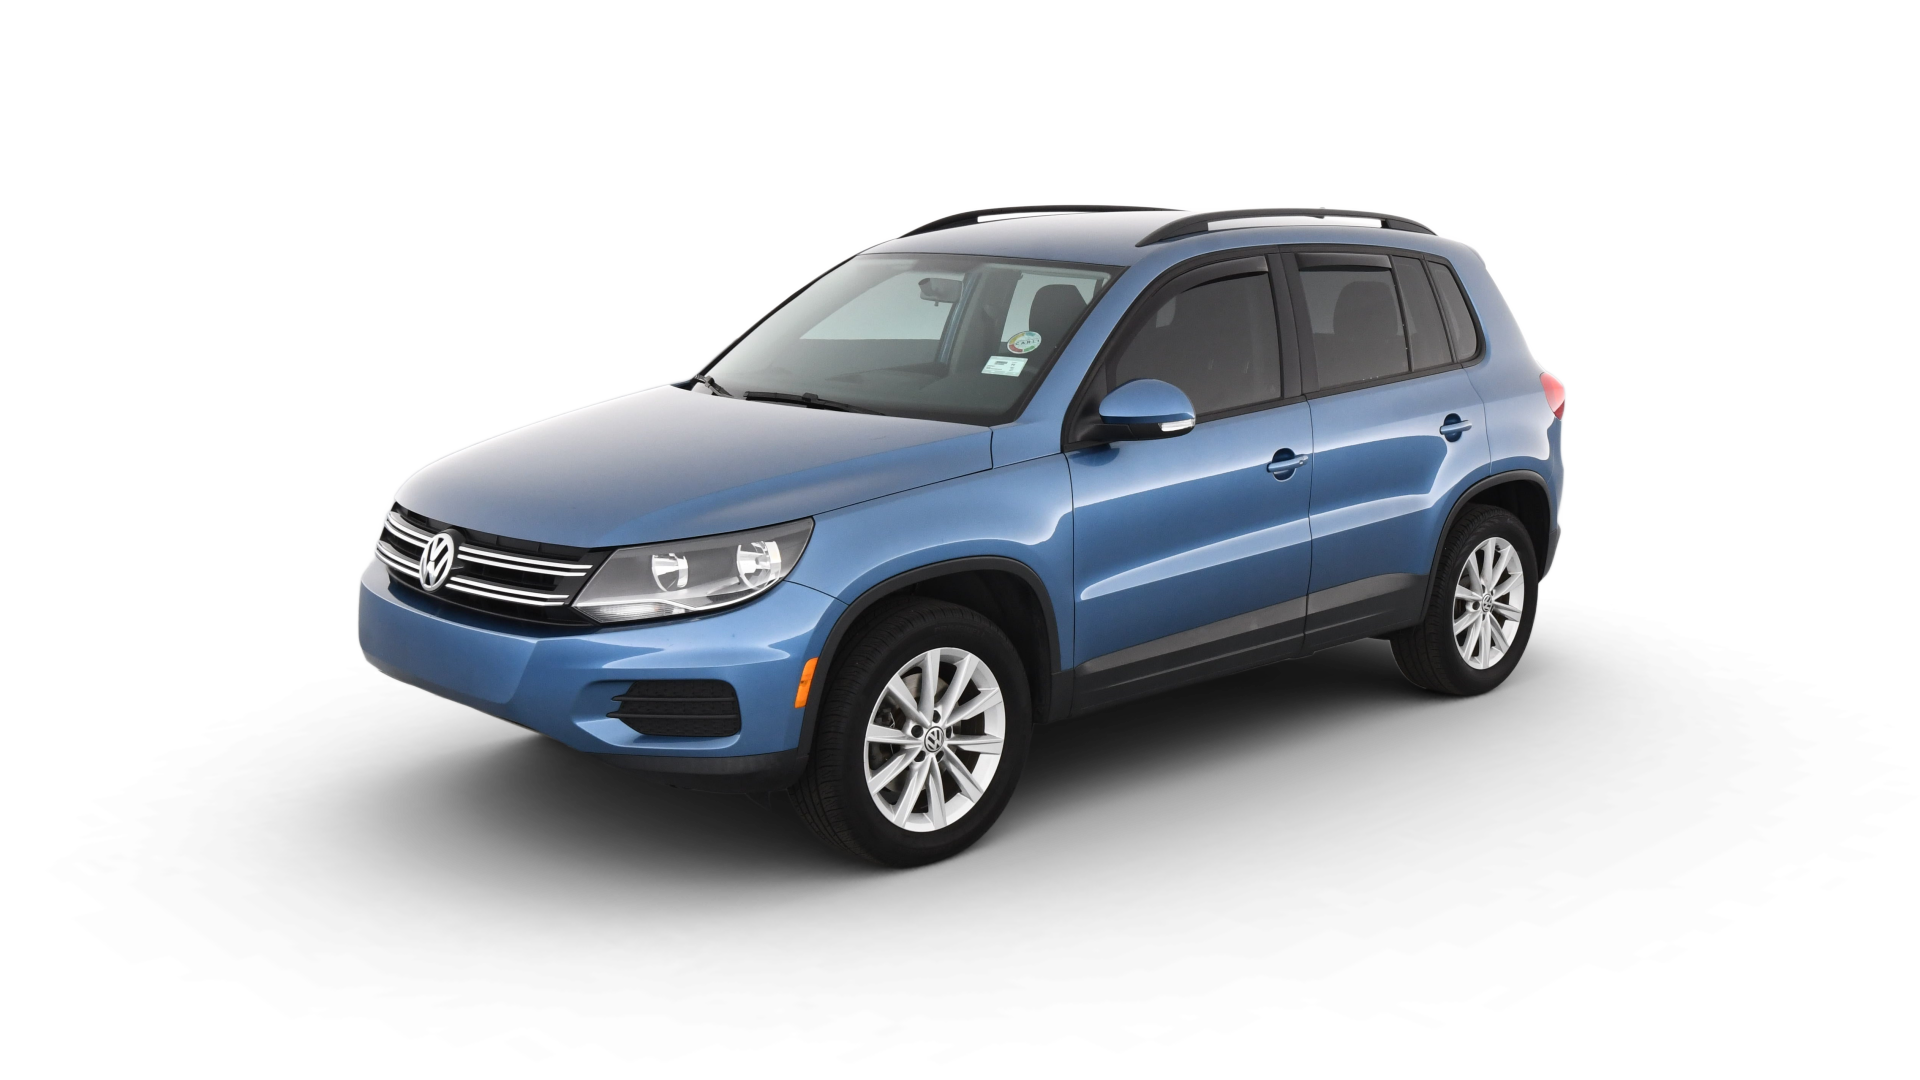 Used Volkswagen Tiguan Limited For Sale Online | Carvana